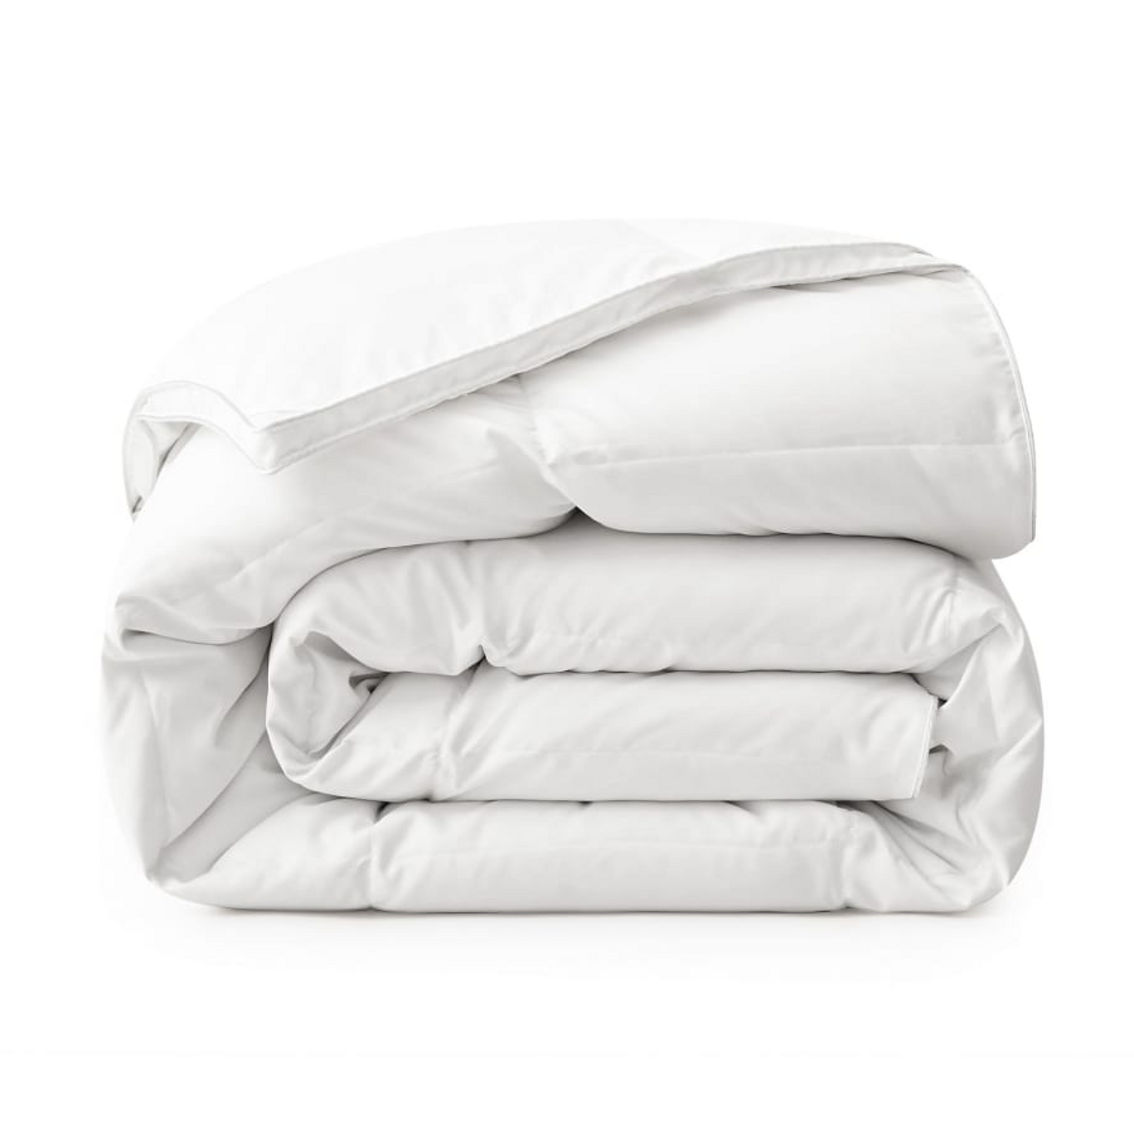 Heavy Weight White Goose Feather Fiber Comforter with Ultra Soft Microfiber Fabric - Image 5 of 5